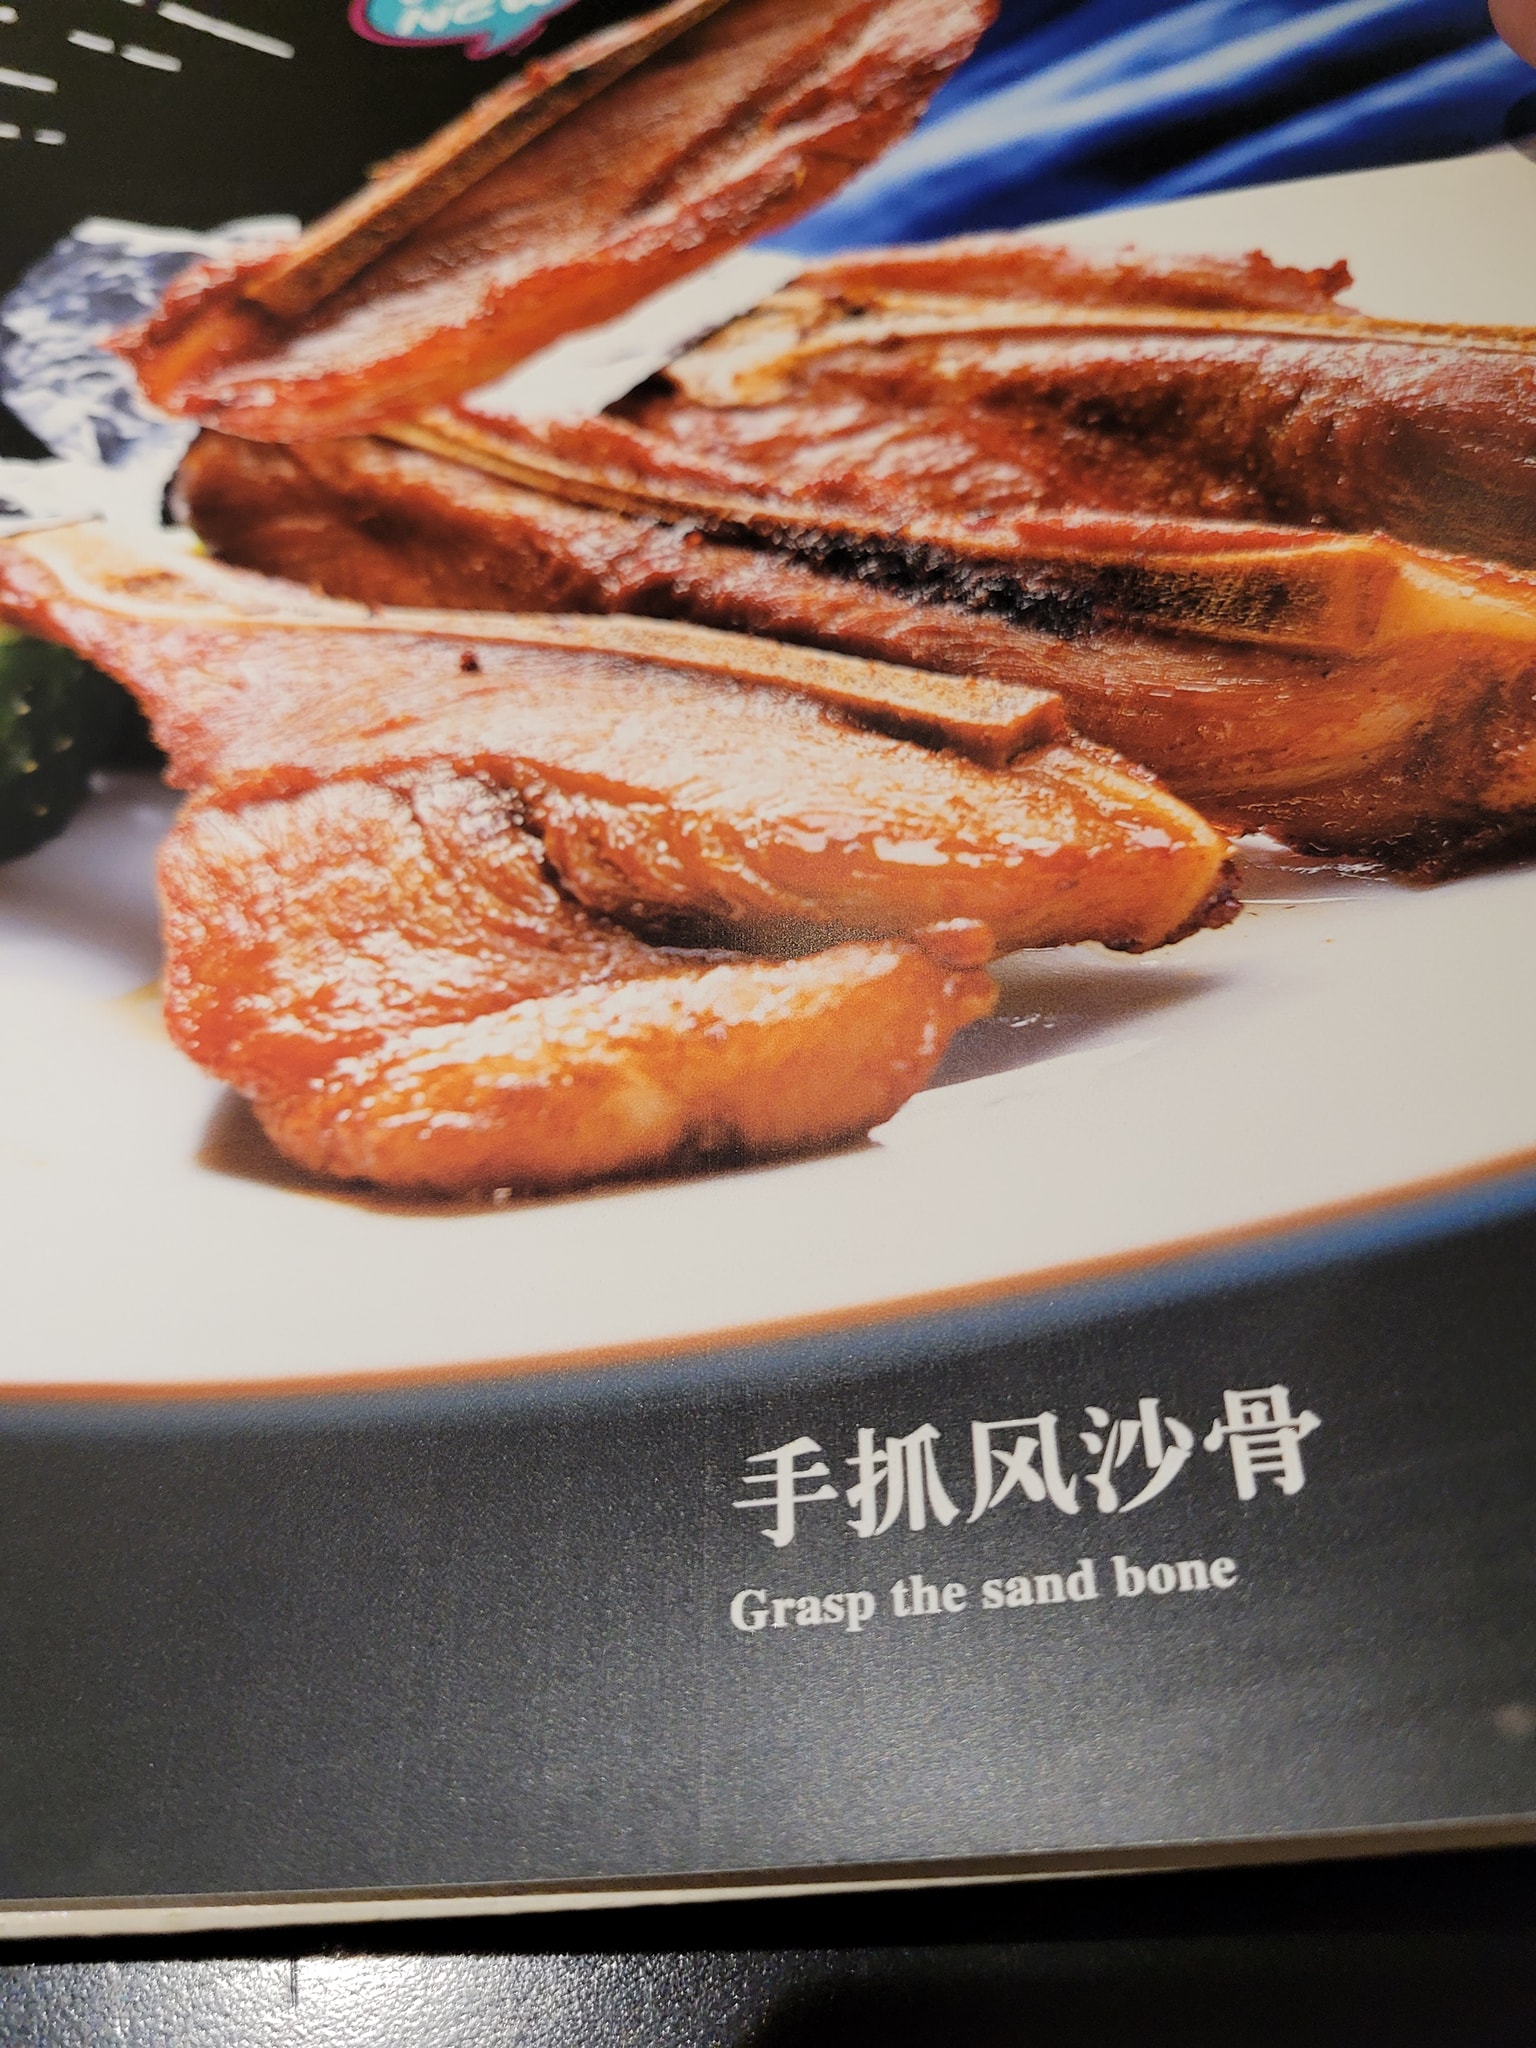 The Singapore-themed restaurant features hilariously bad English translations on their menus. Source: Arthur Pang